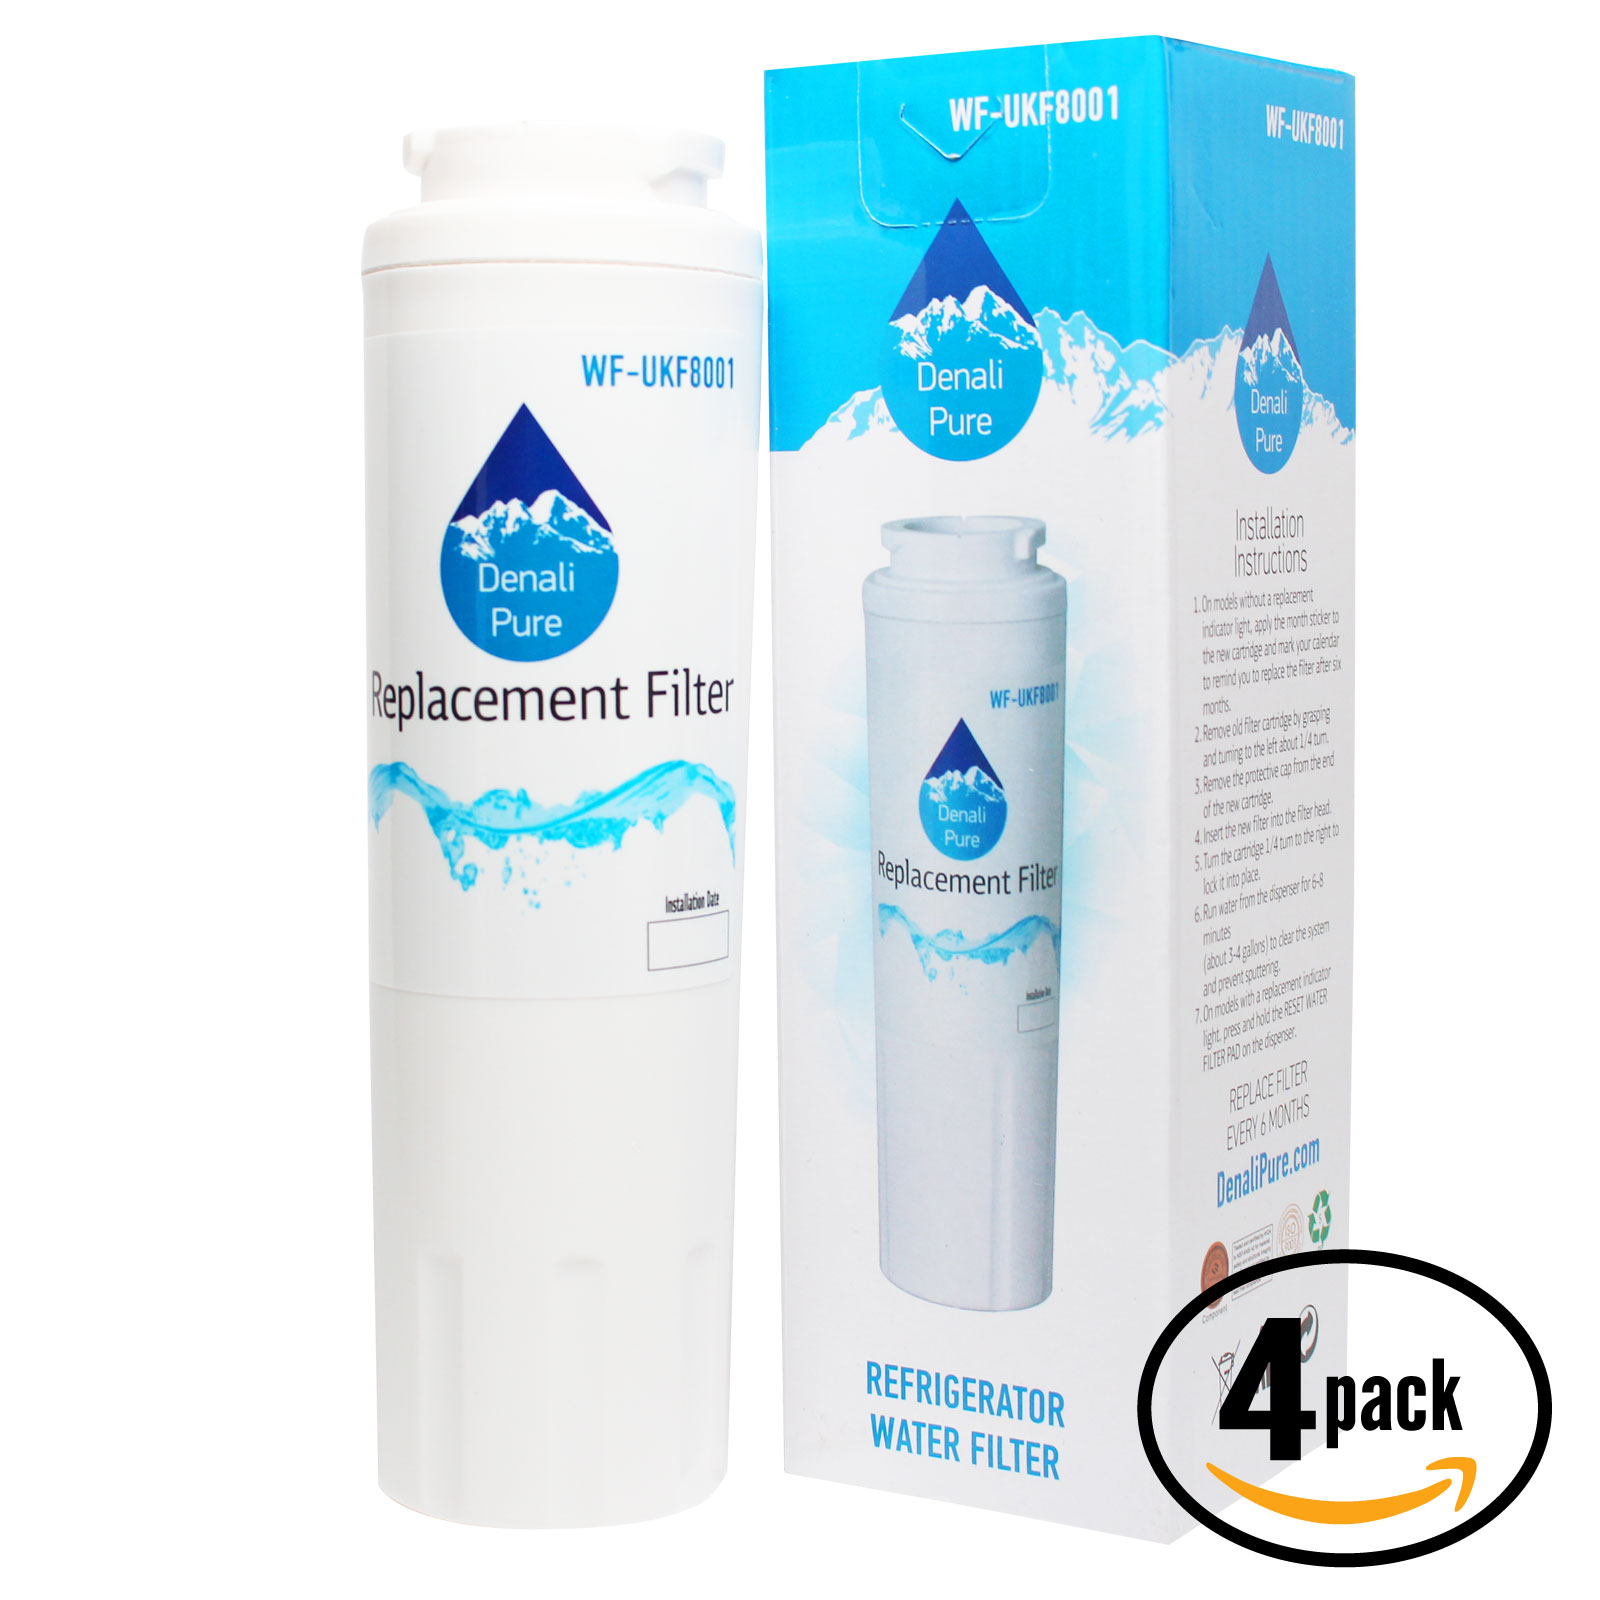 5-Pack Compatible with KitchenAid KFCS22EVMS3 Refrigerator Water Filter - Compatible with KitchenAid 4396395 Fridge Water Filter Cartridge - image 1 of 4